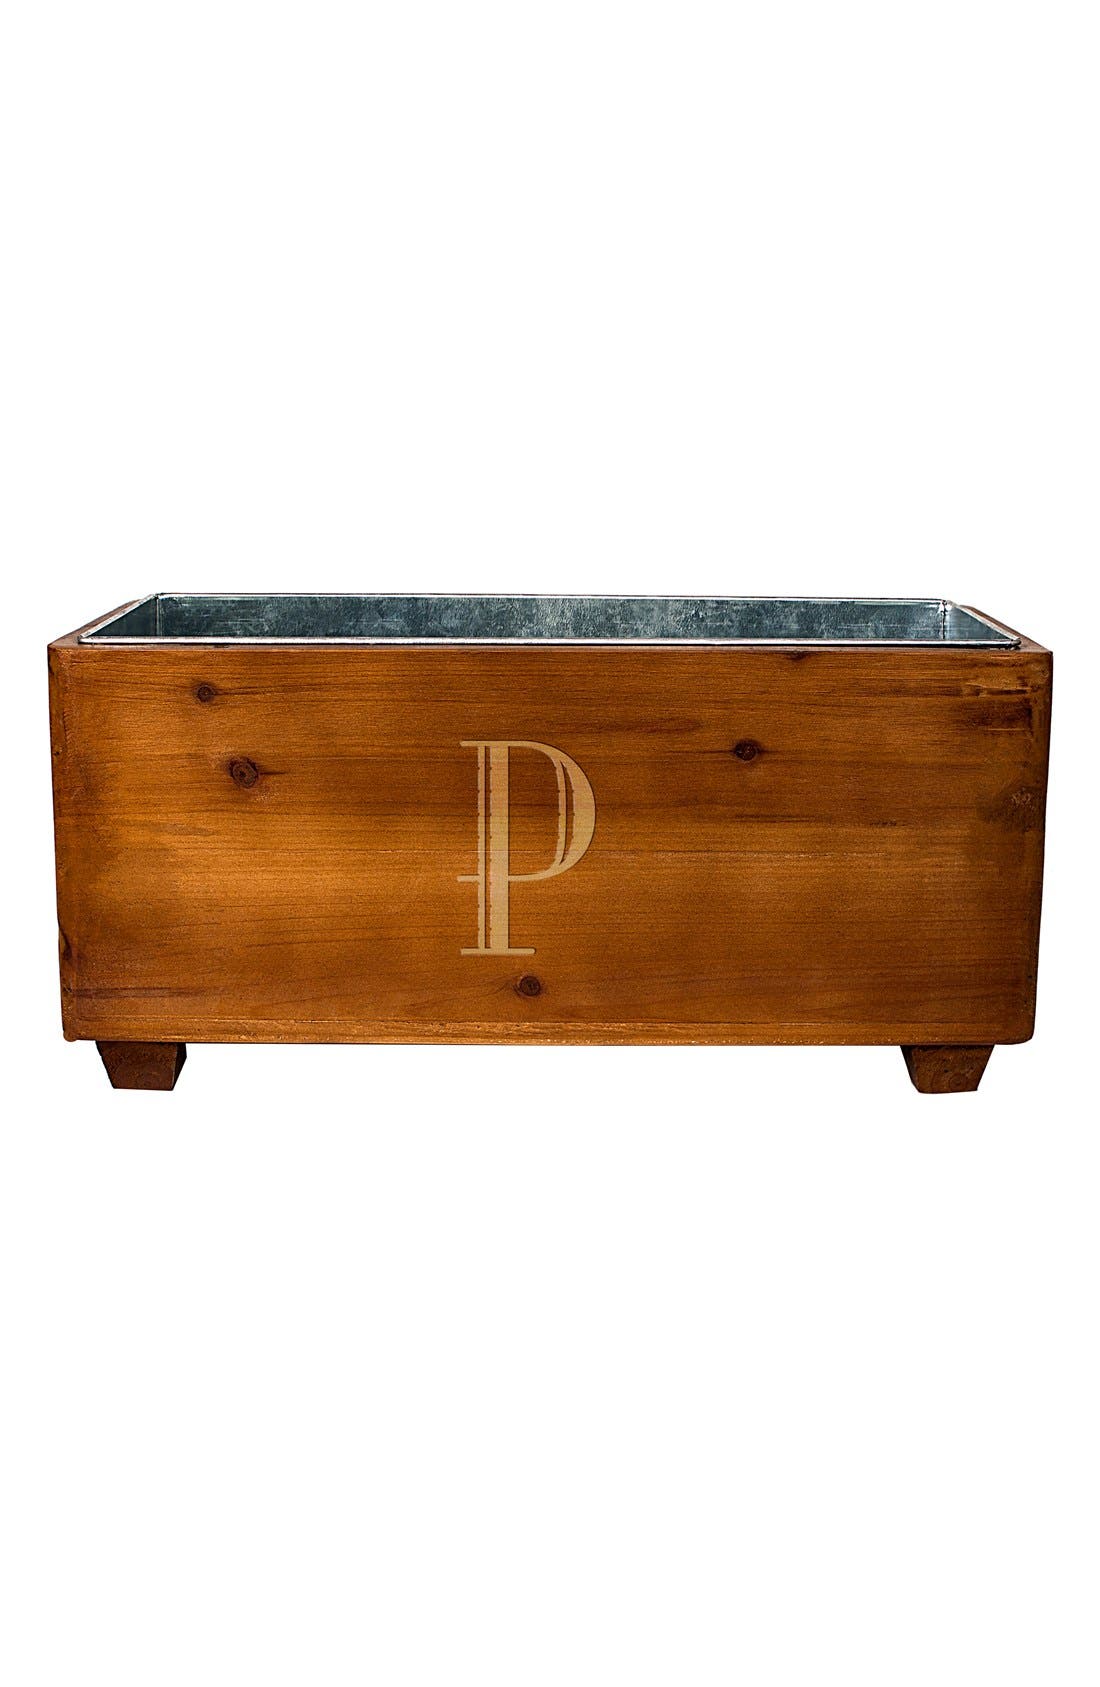 UPC 694546529288 product image for Cathy's Concepts Monogram Wood Wine Trough, Size One Size - Brown | upcitemdb.com